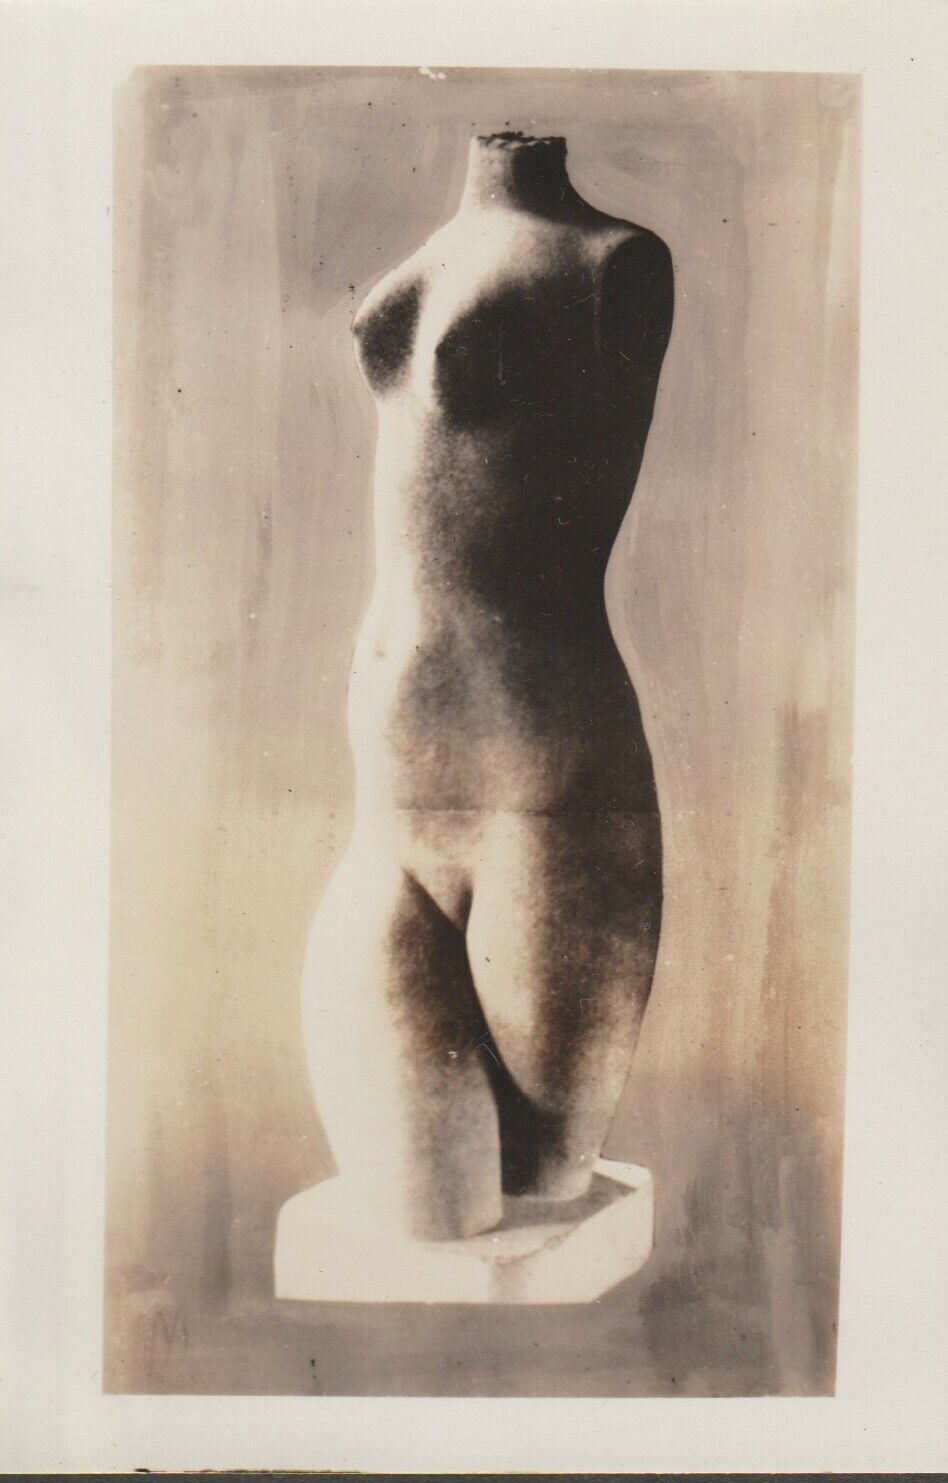 VINTAGE PHOTOGRAPH OF TORSO BY FRANK DOBSON